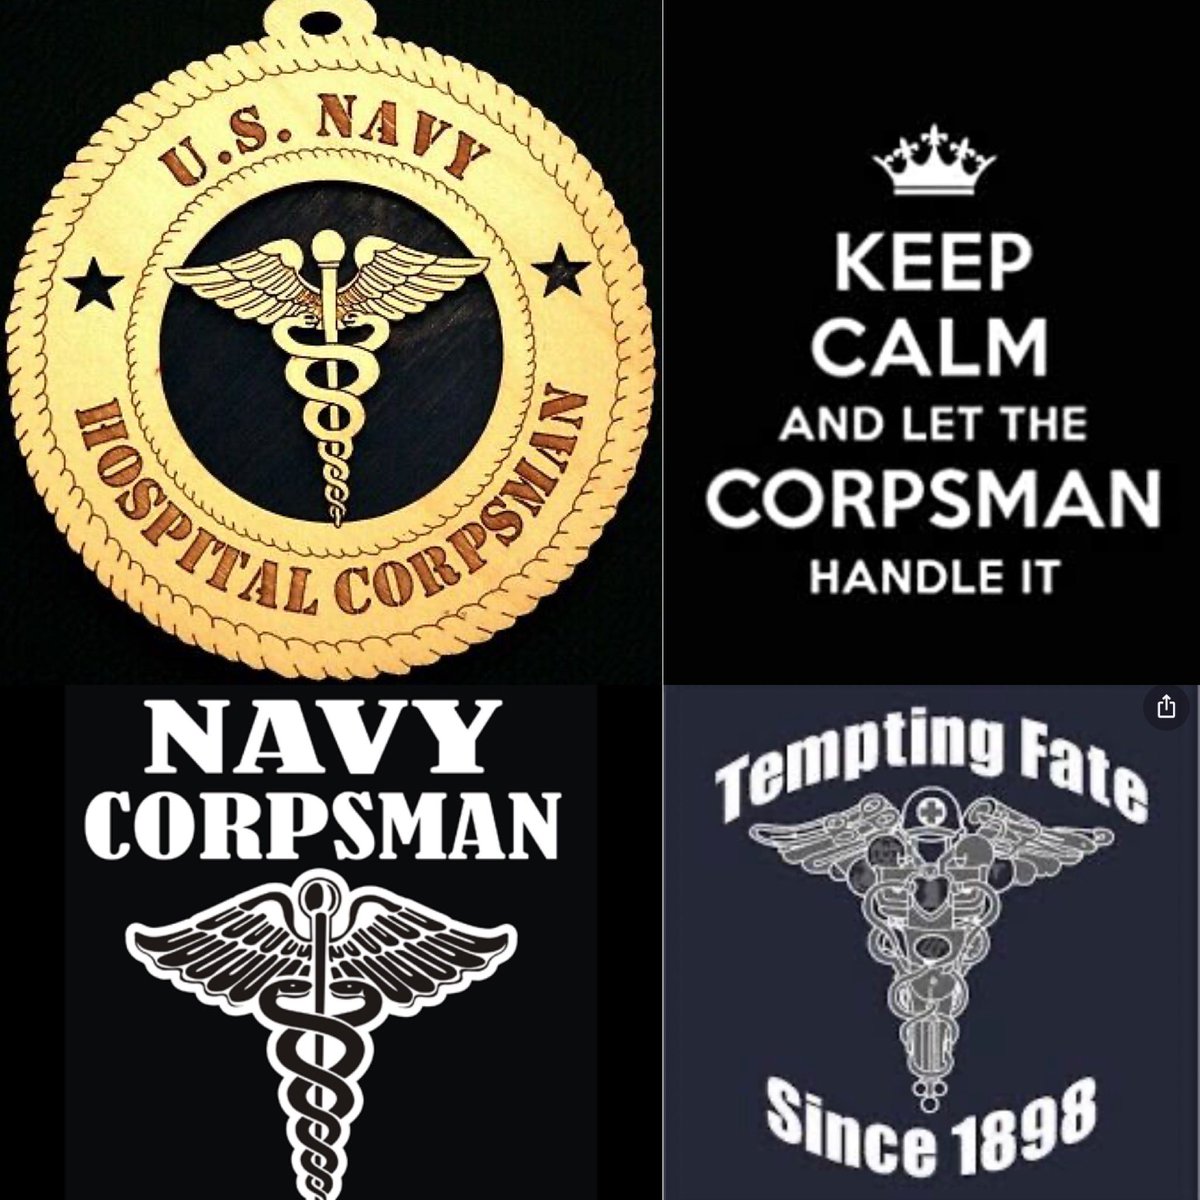 #122YearsStrong #CorpsmanUp corpsman up birthday 2020 for all those representing the HM rating.